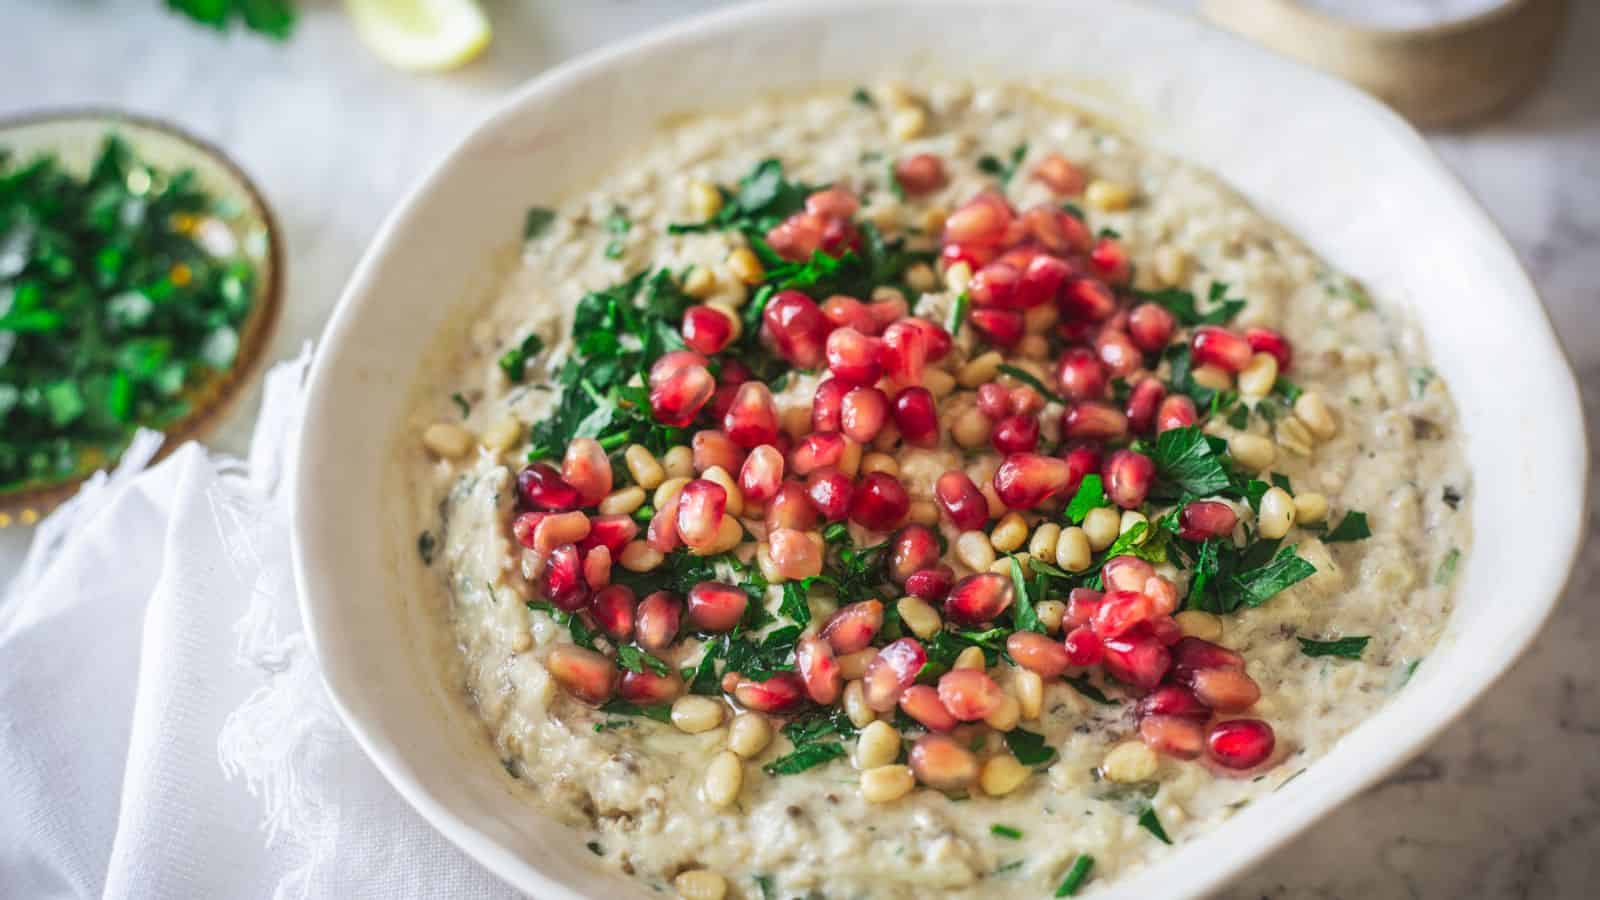 A bowl of hummus with pomegranate and parsley.